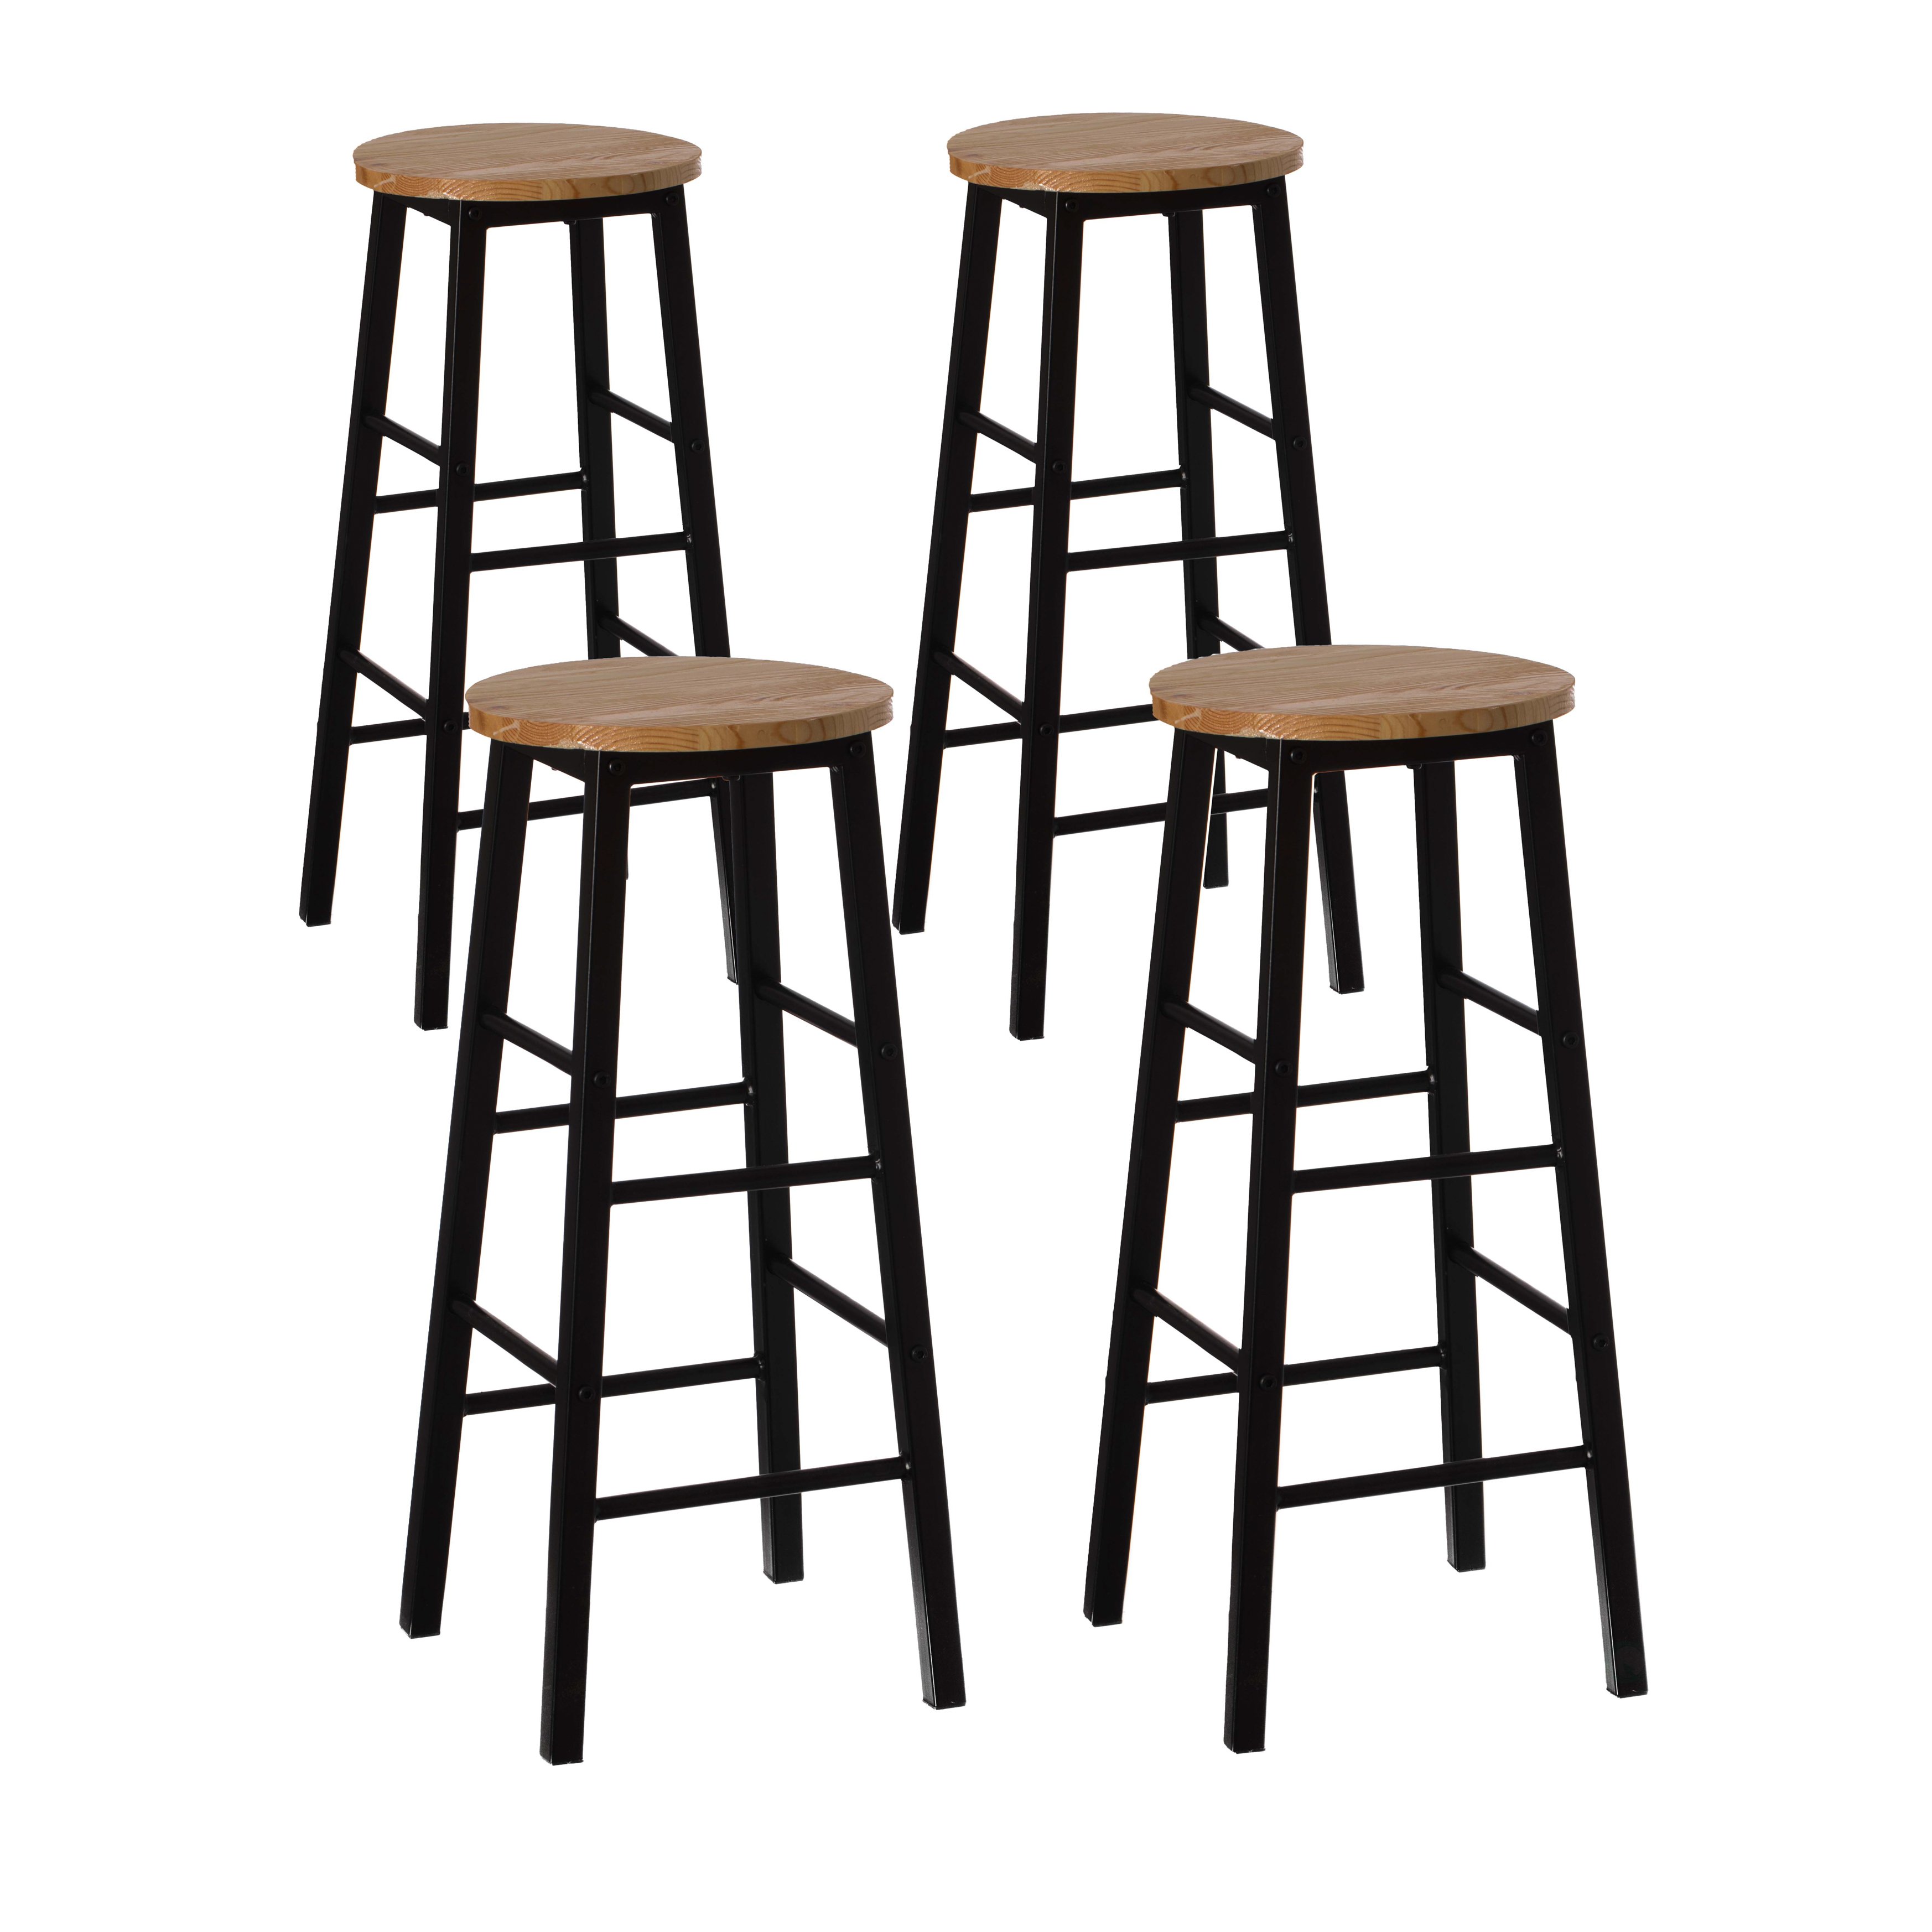 28 High Wooden Rustic Round Bar Stool With Footrest For Indoor And Outdoor - Single